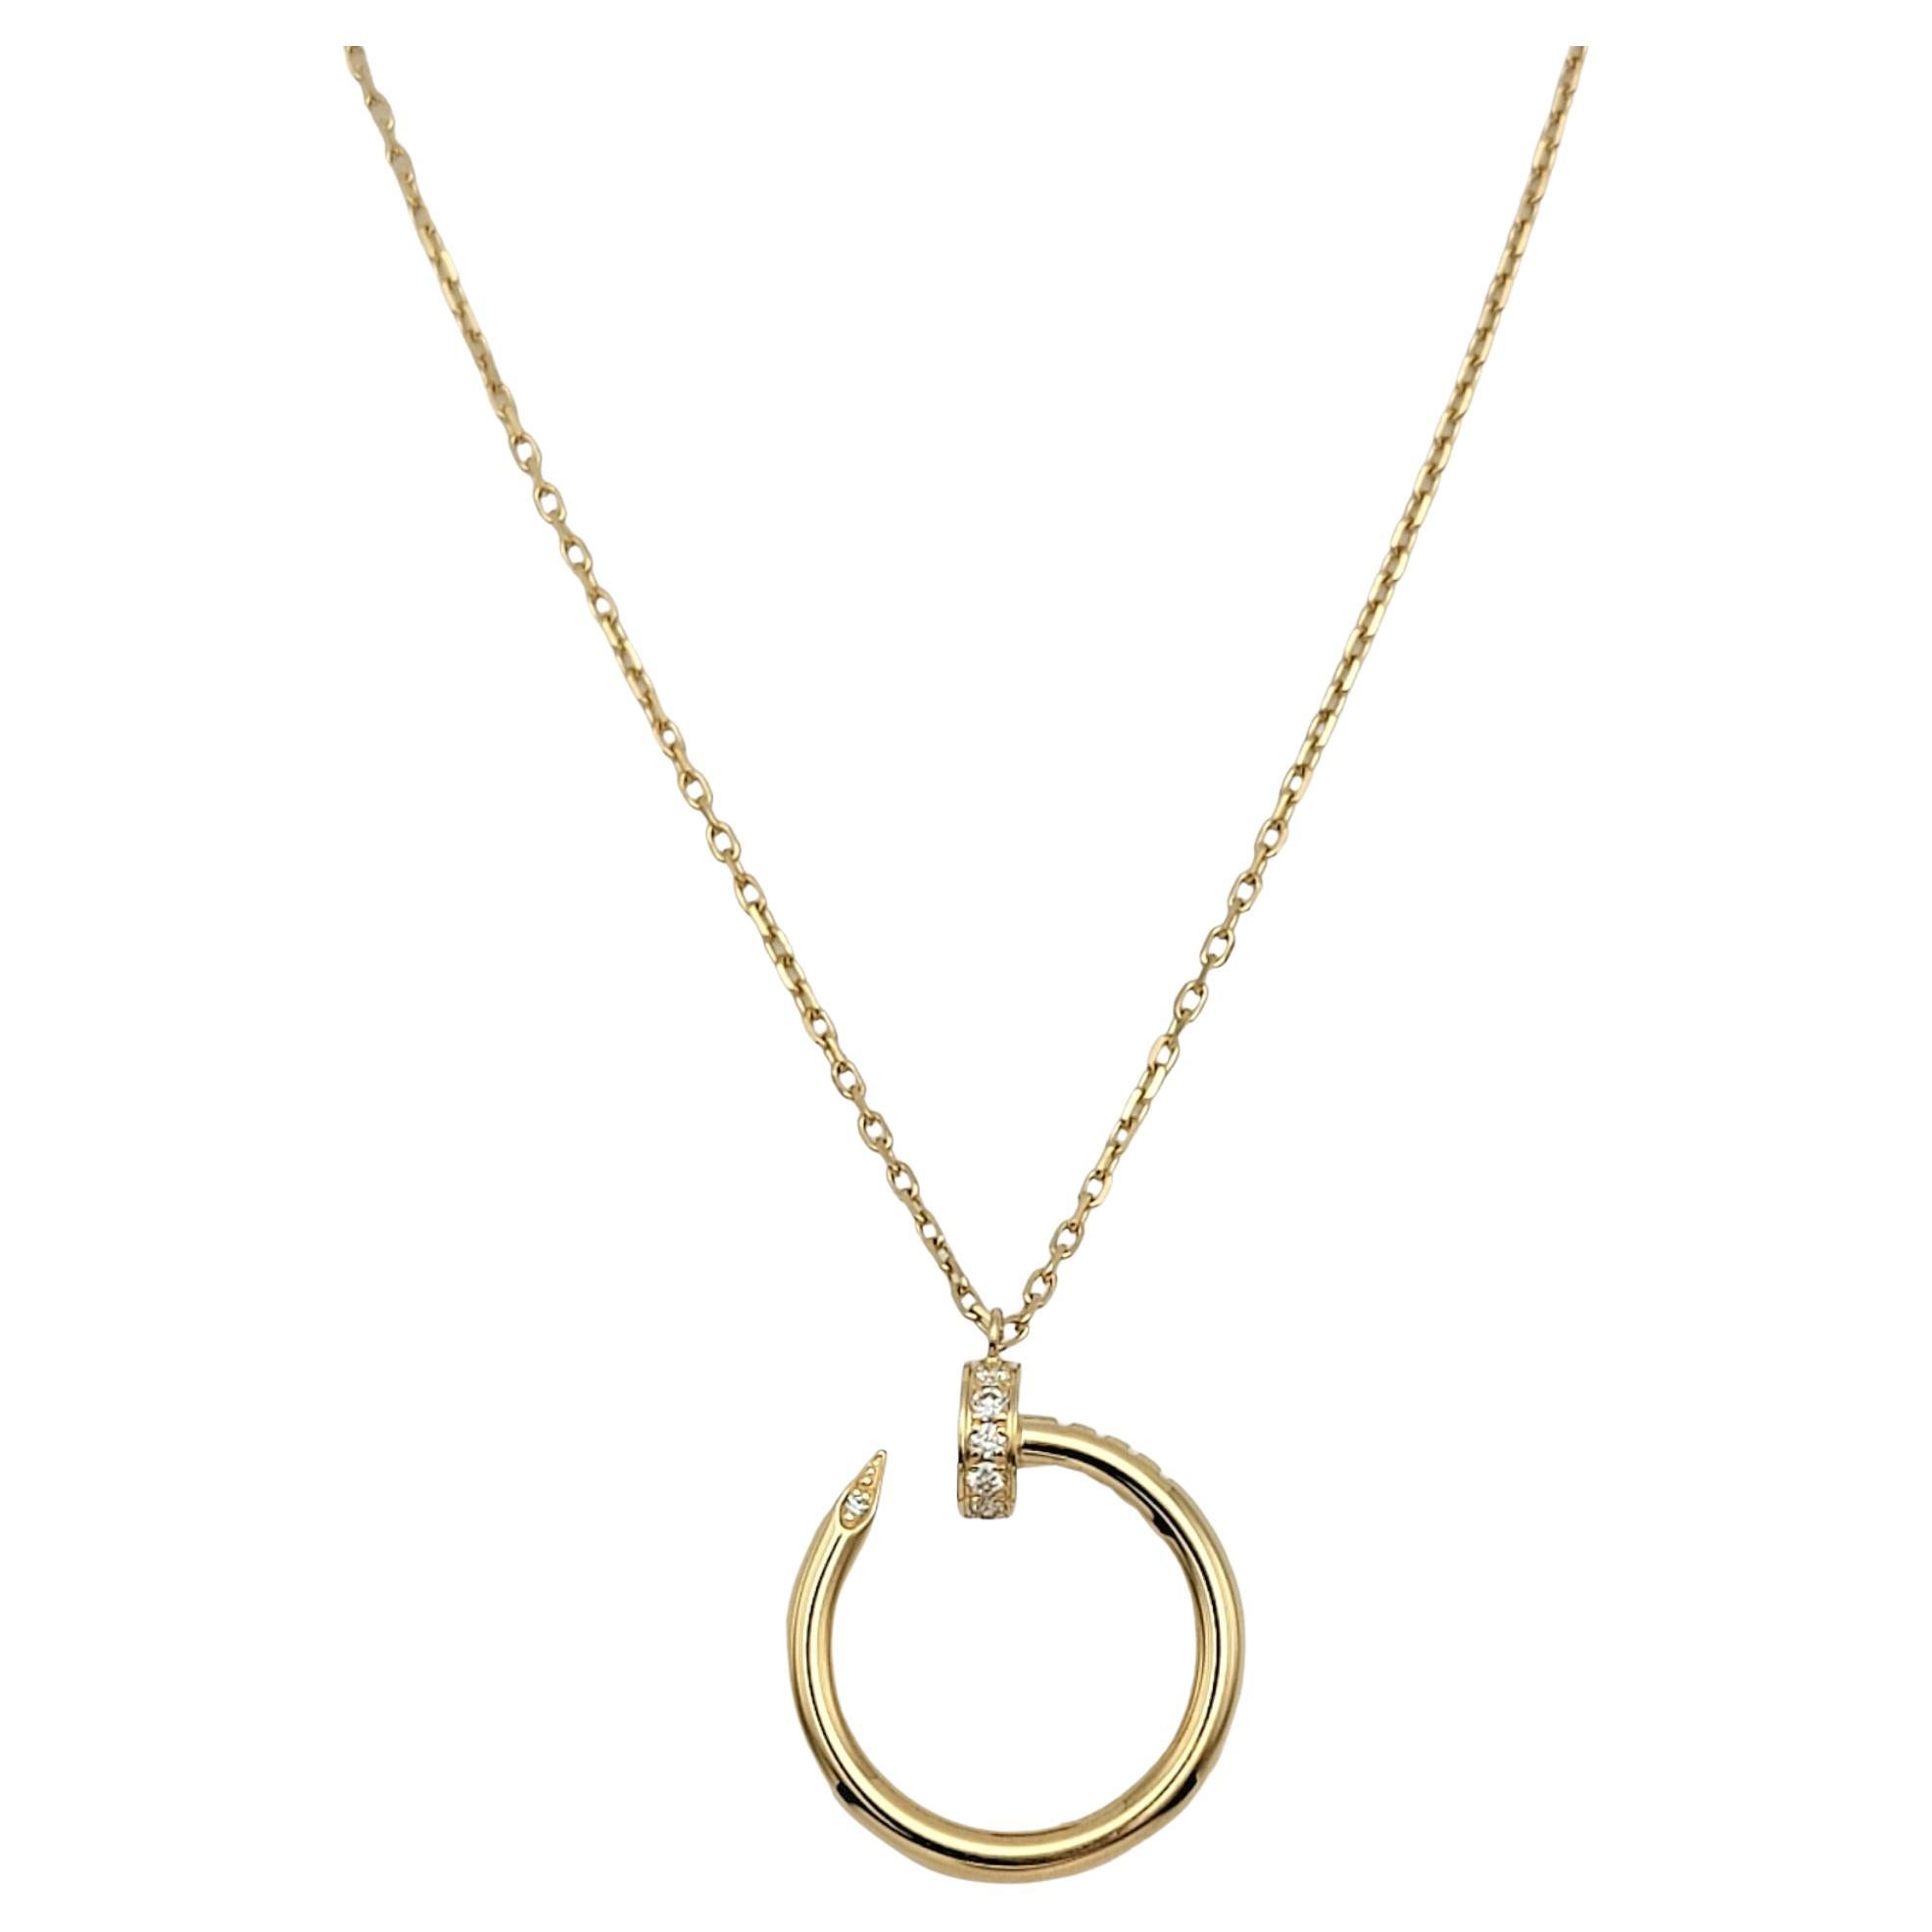 Iconic Juste un Clou pendant necklace from esteemed jeweler, Cartier. Cartier is a French high-end luxury goods conglomerate that designs, manufactures, distributes, and sells jewelry, leather goods, and watches. It was founded by Louis-François